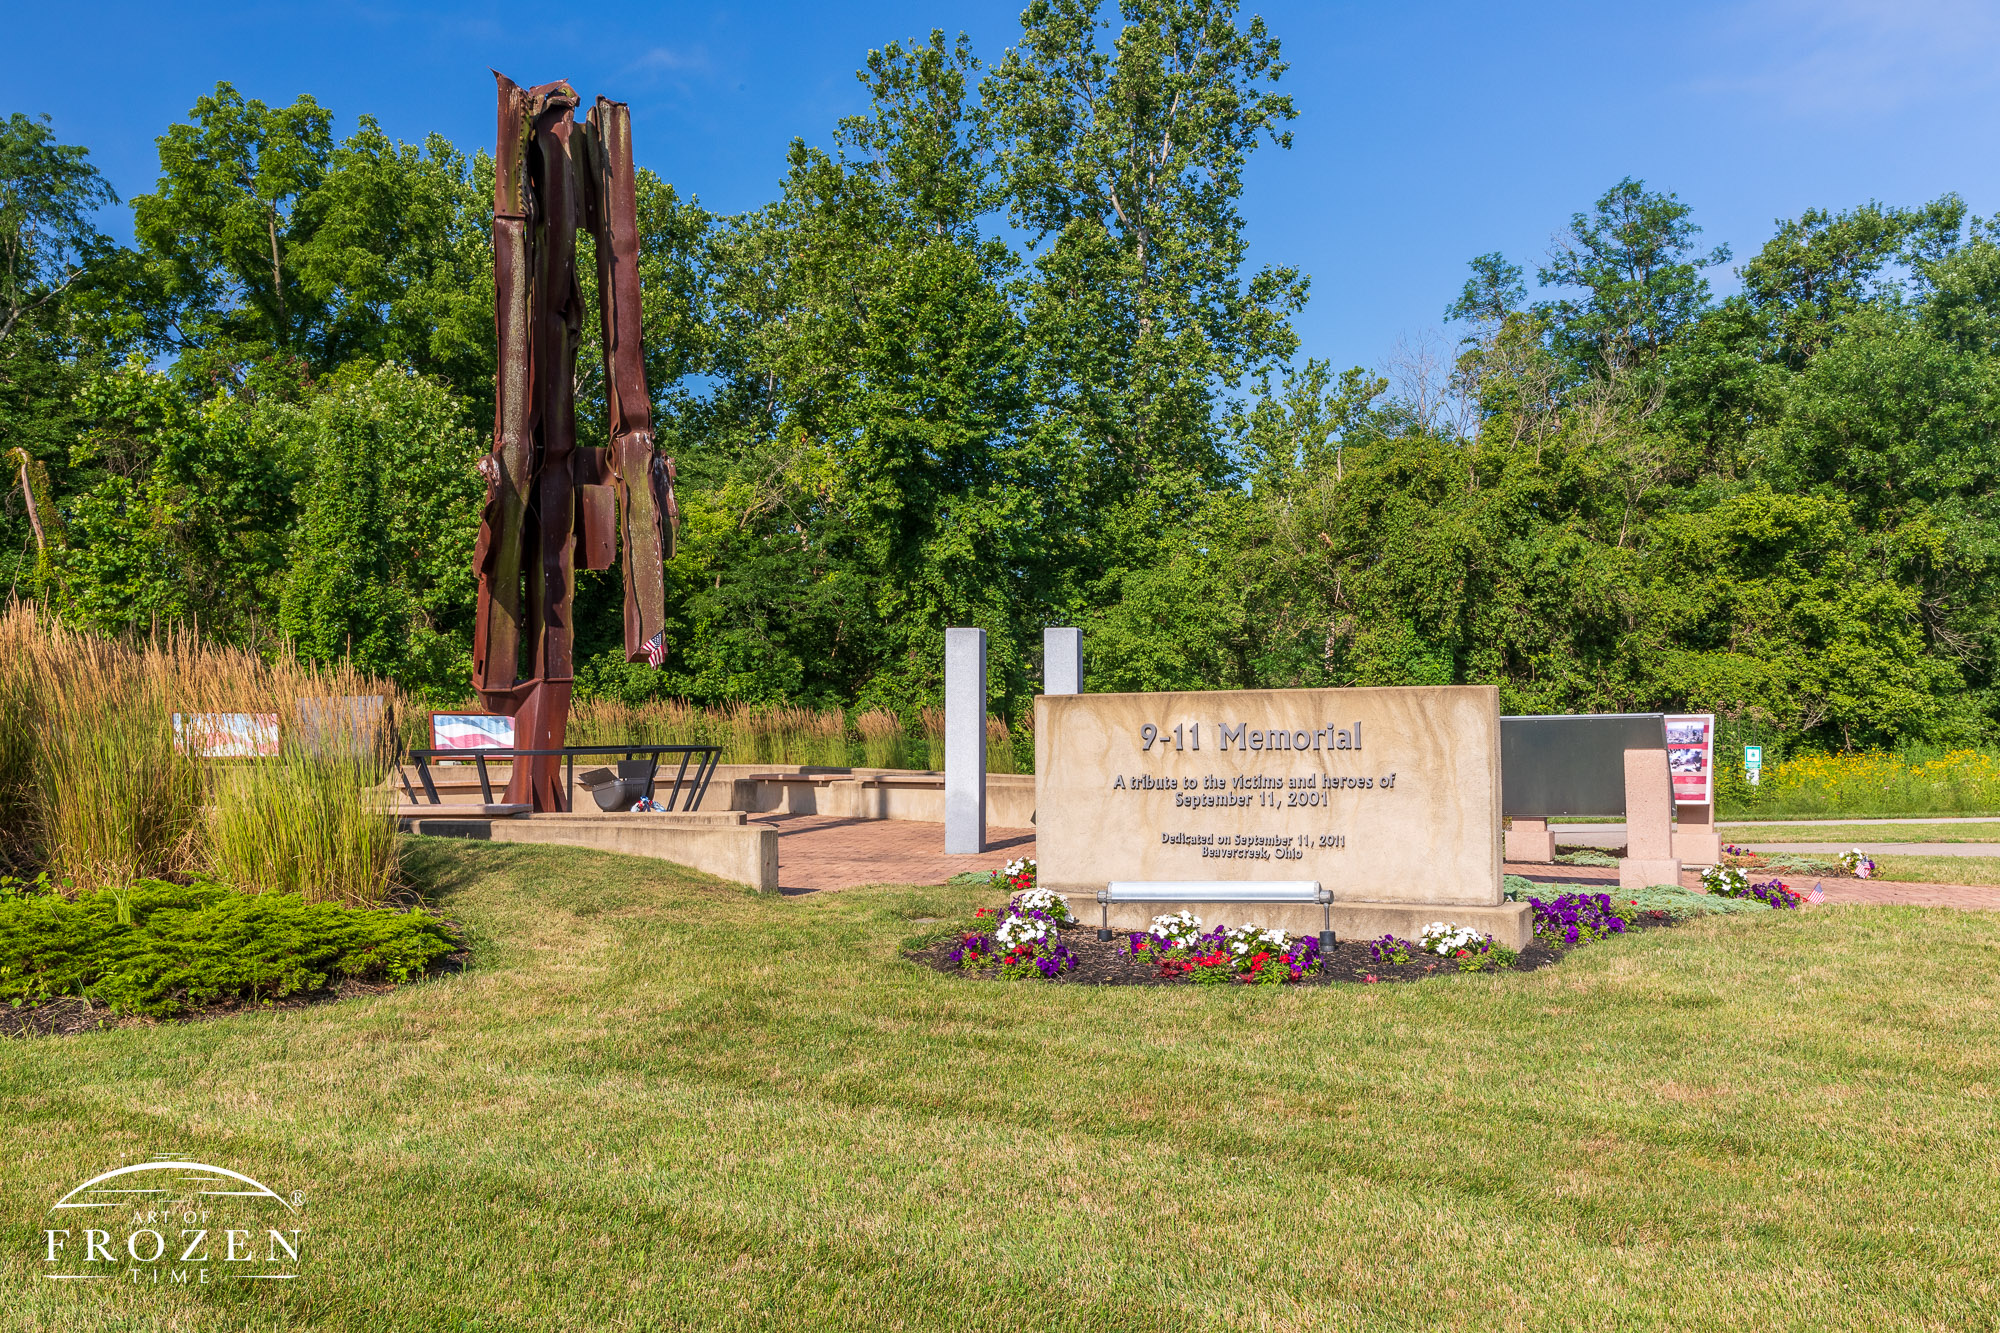 A Beavercreek Ohio 9/11 memorial featuring a 23-foot bent and sheared steel beam of the World Trade Center that sits among flowers and flags